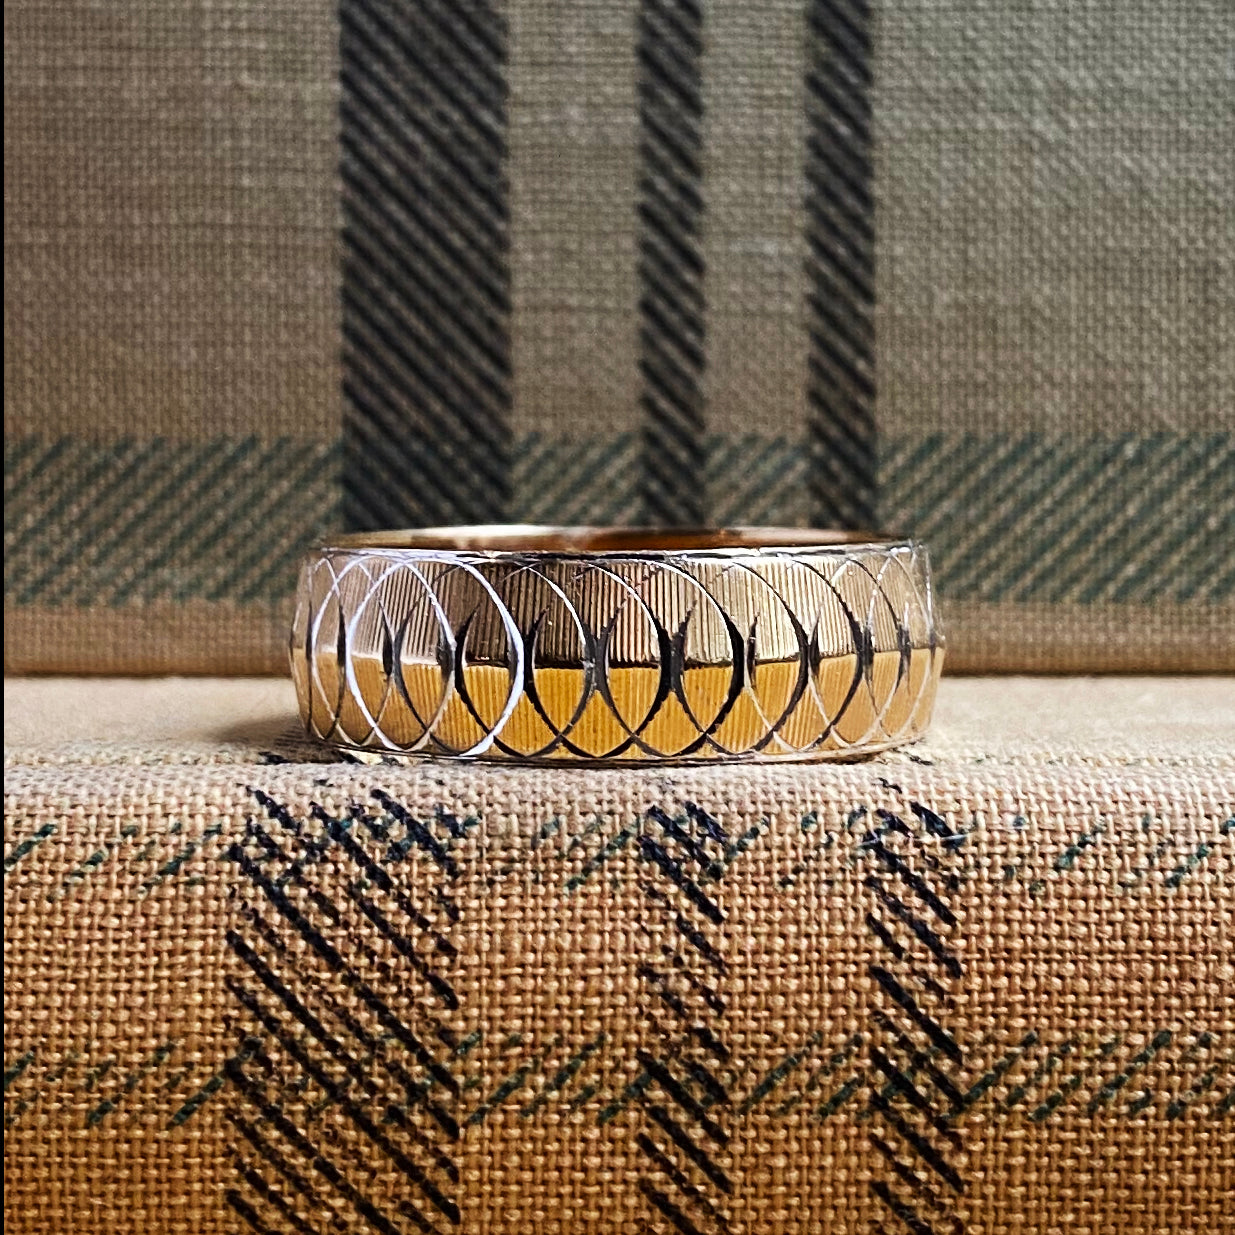 Two-toned Coil Patterned Band c1960